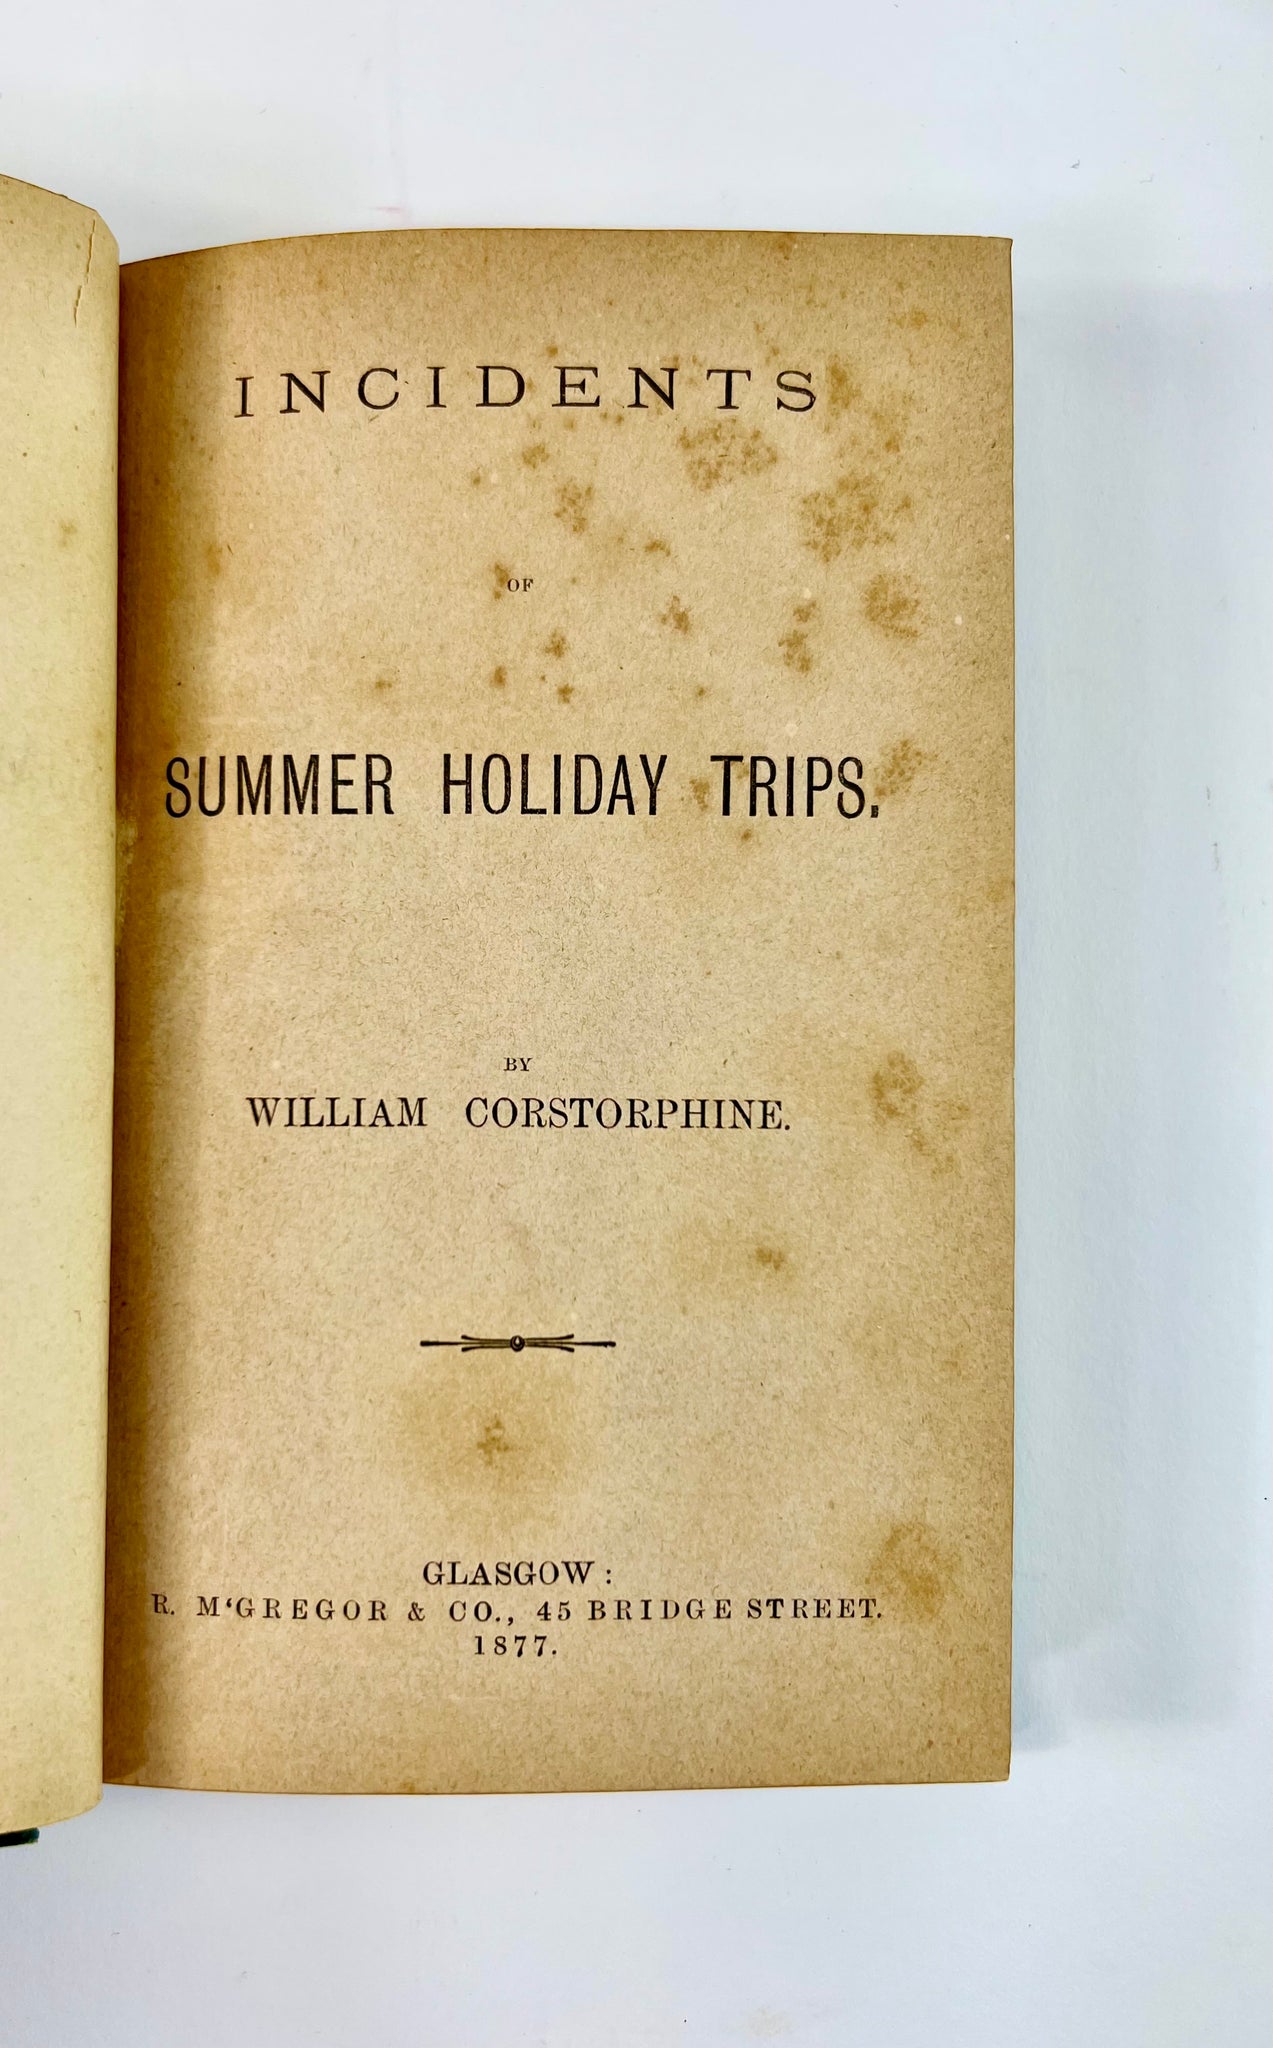 CORSTORPHINE, William. Incidents of Summer Holiday Trips.